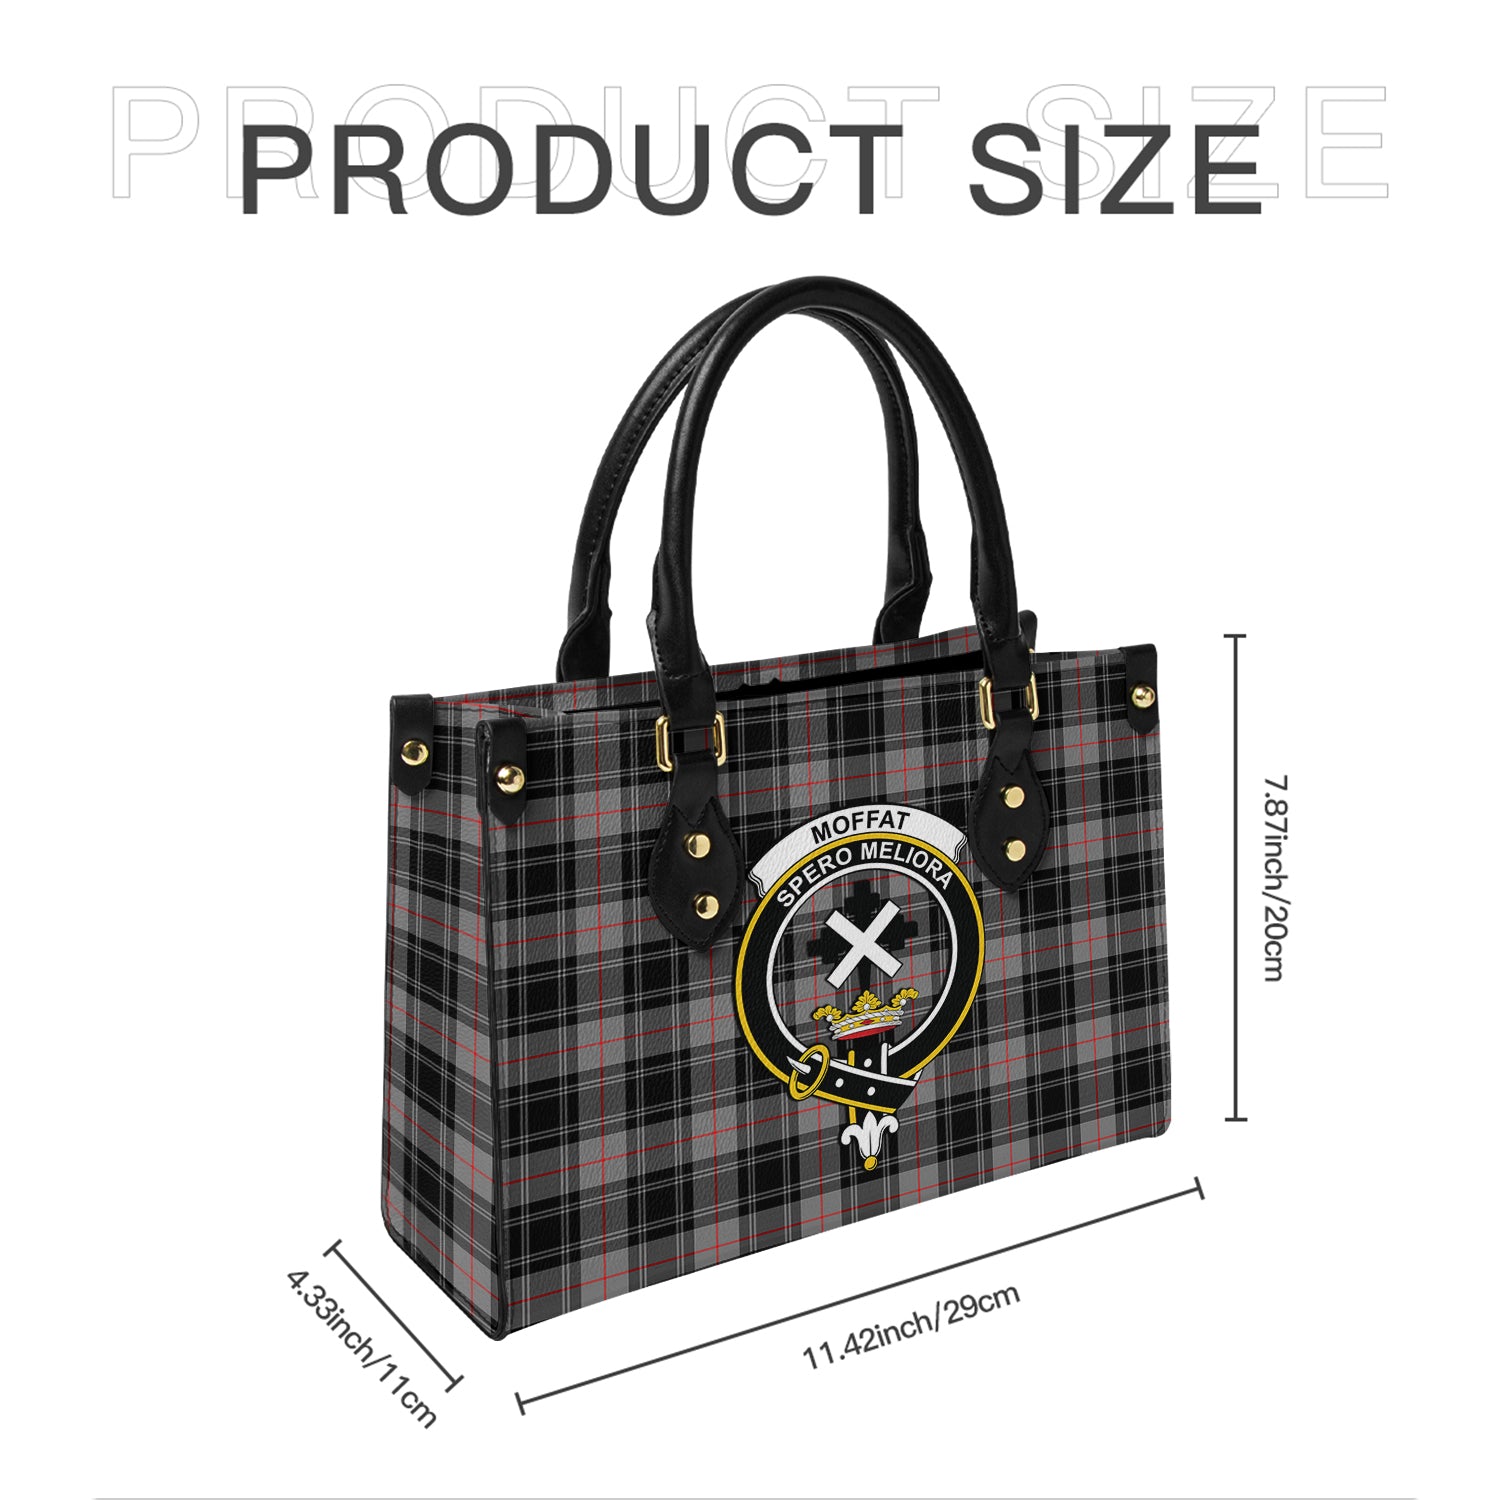 moffat-modern-tartan-leather-bag-with-family-crest